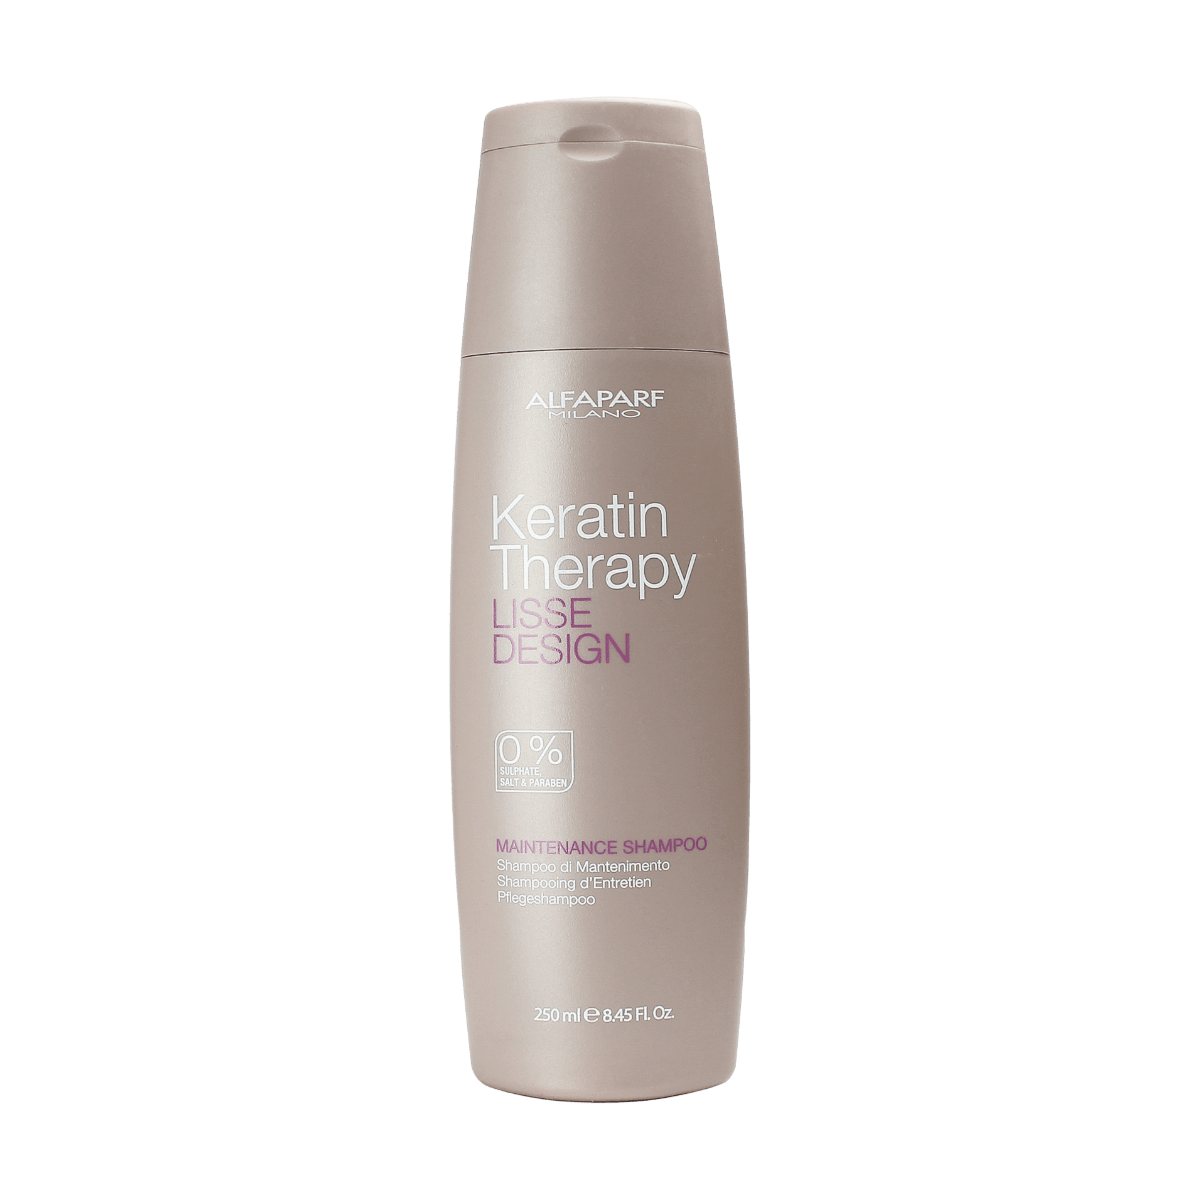 Lisse design keratin therapy pret